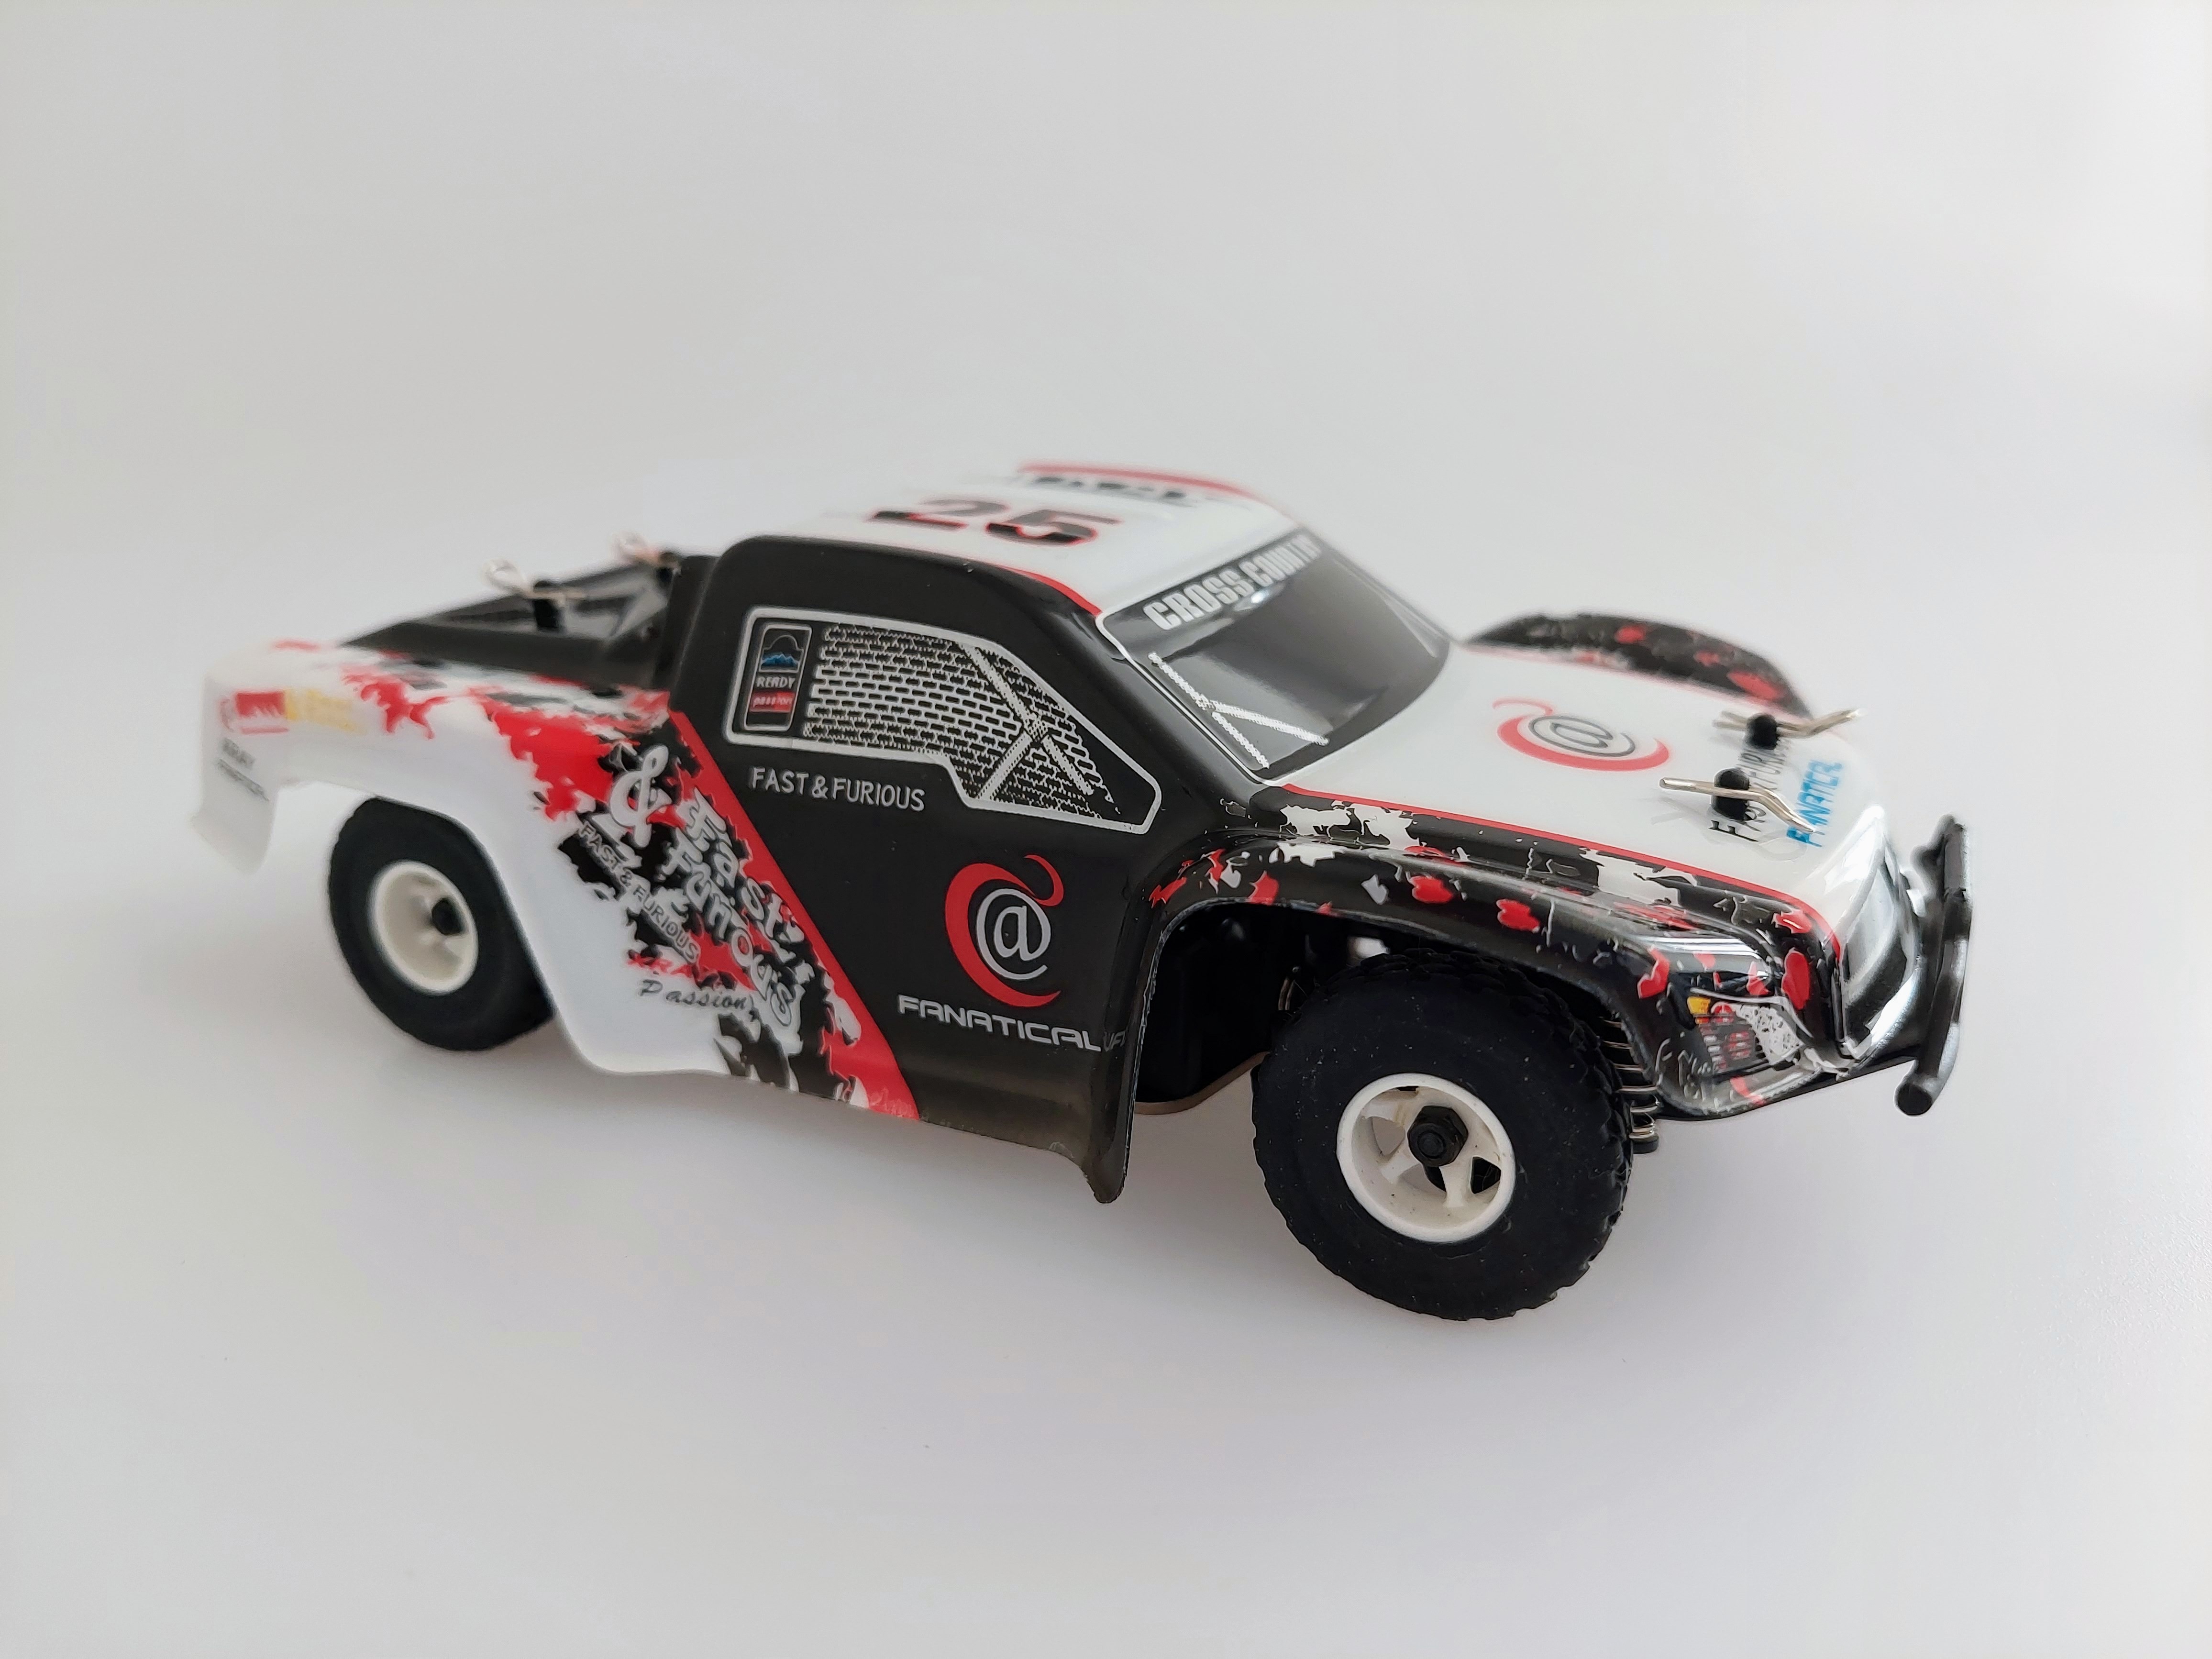 S-idee RC auto Electric 4WD Short Truck 1:28